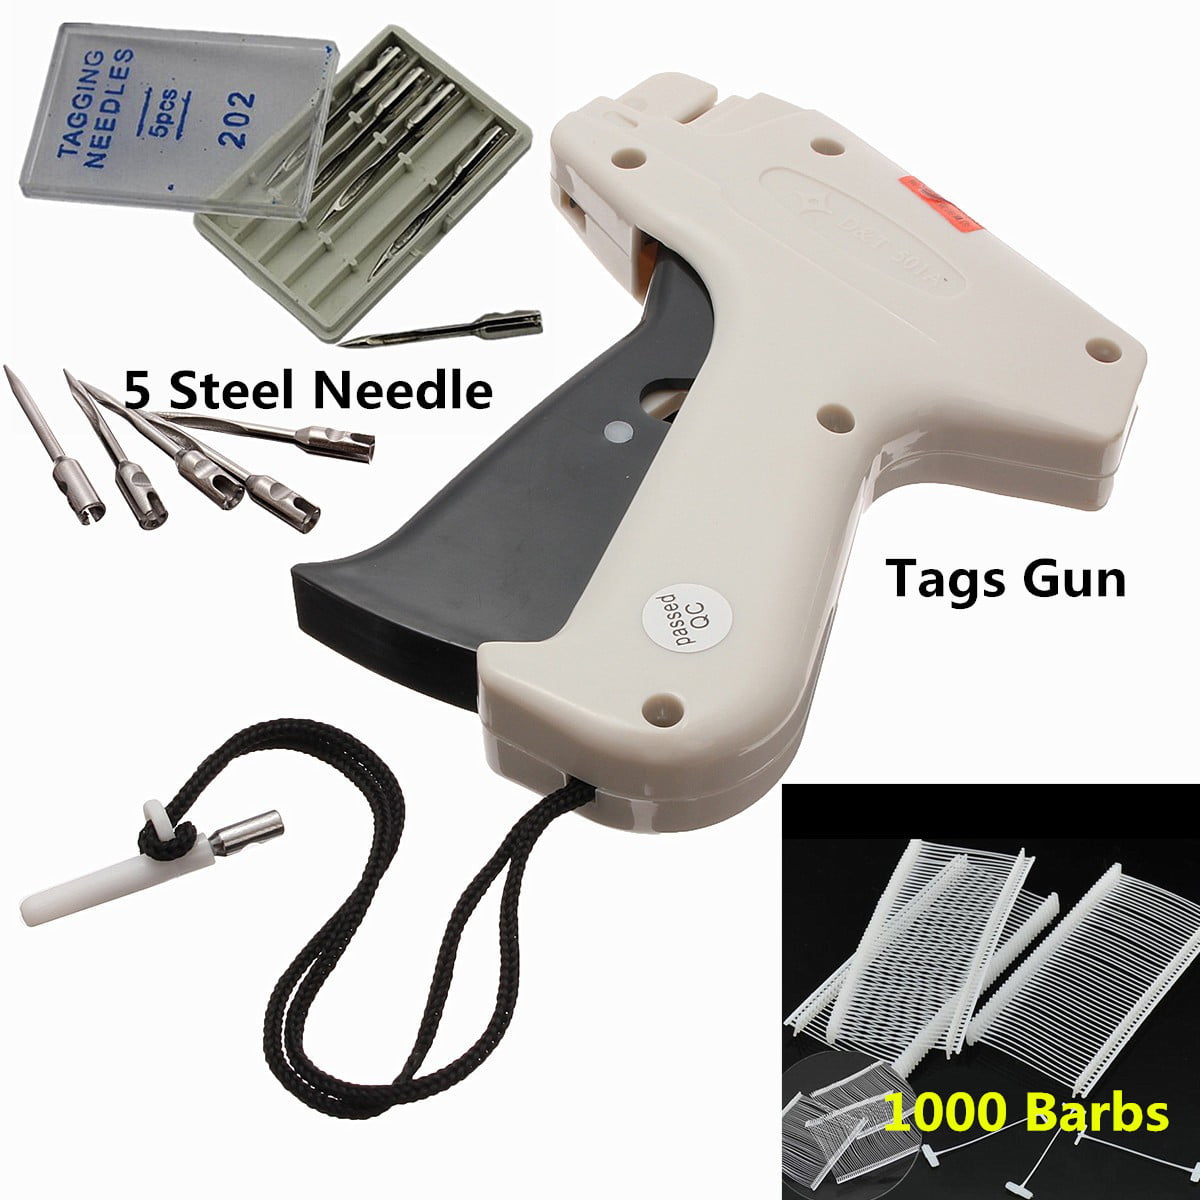 5XStandard Price Tag Gun Needles For Any Standard Label Price Tag Attacher FadEC 